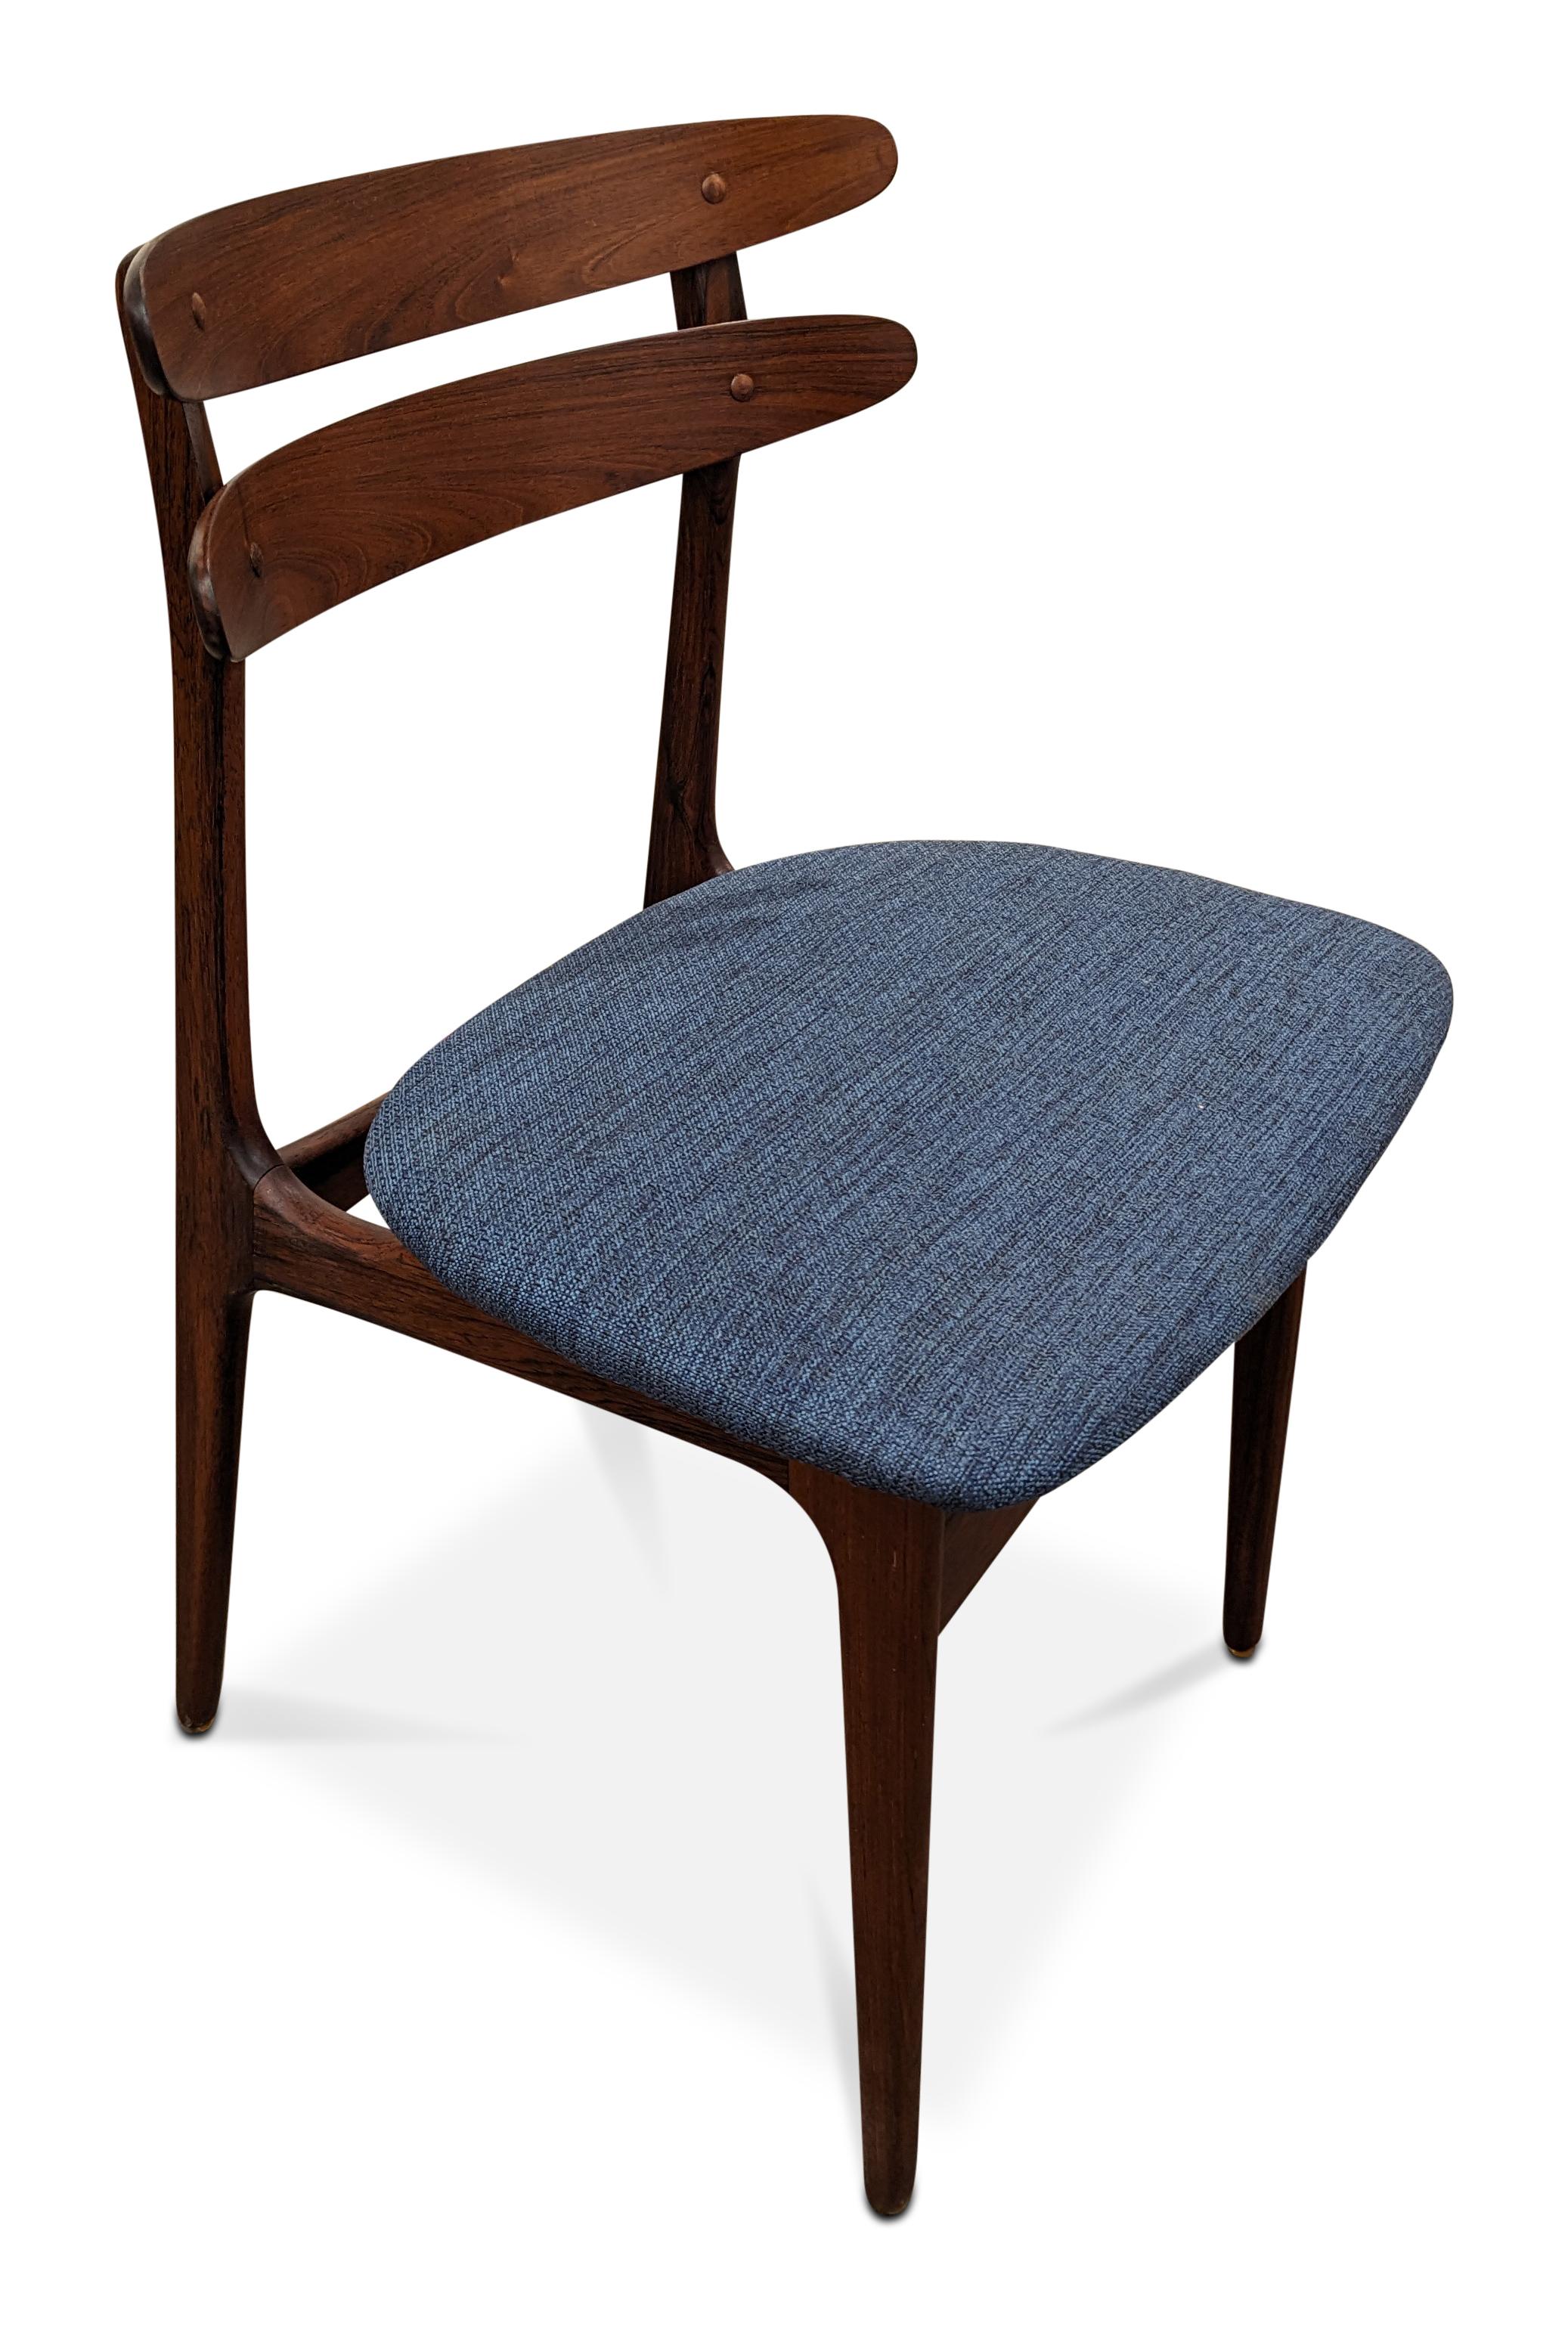 6 Rosewood Dining Chairs - 022483 Vintage Danish Mid Century 2